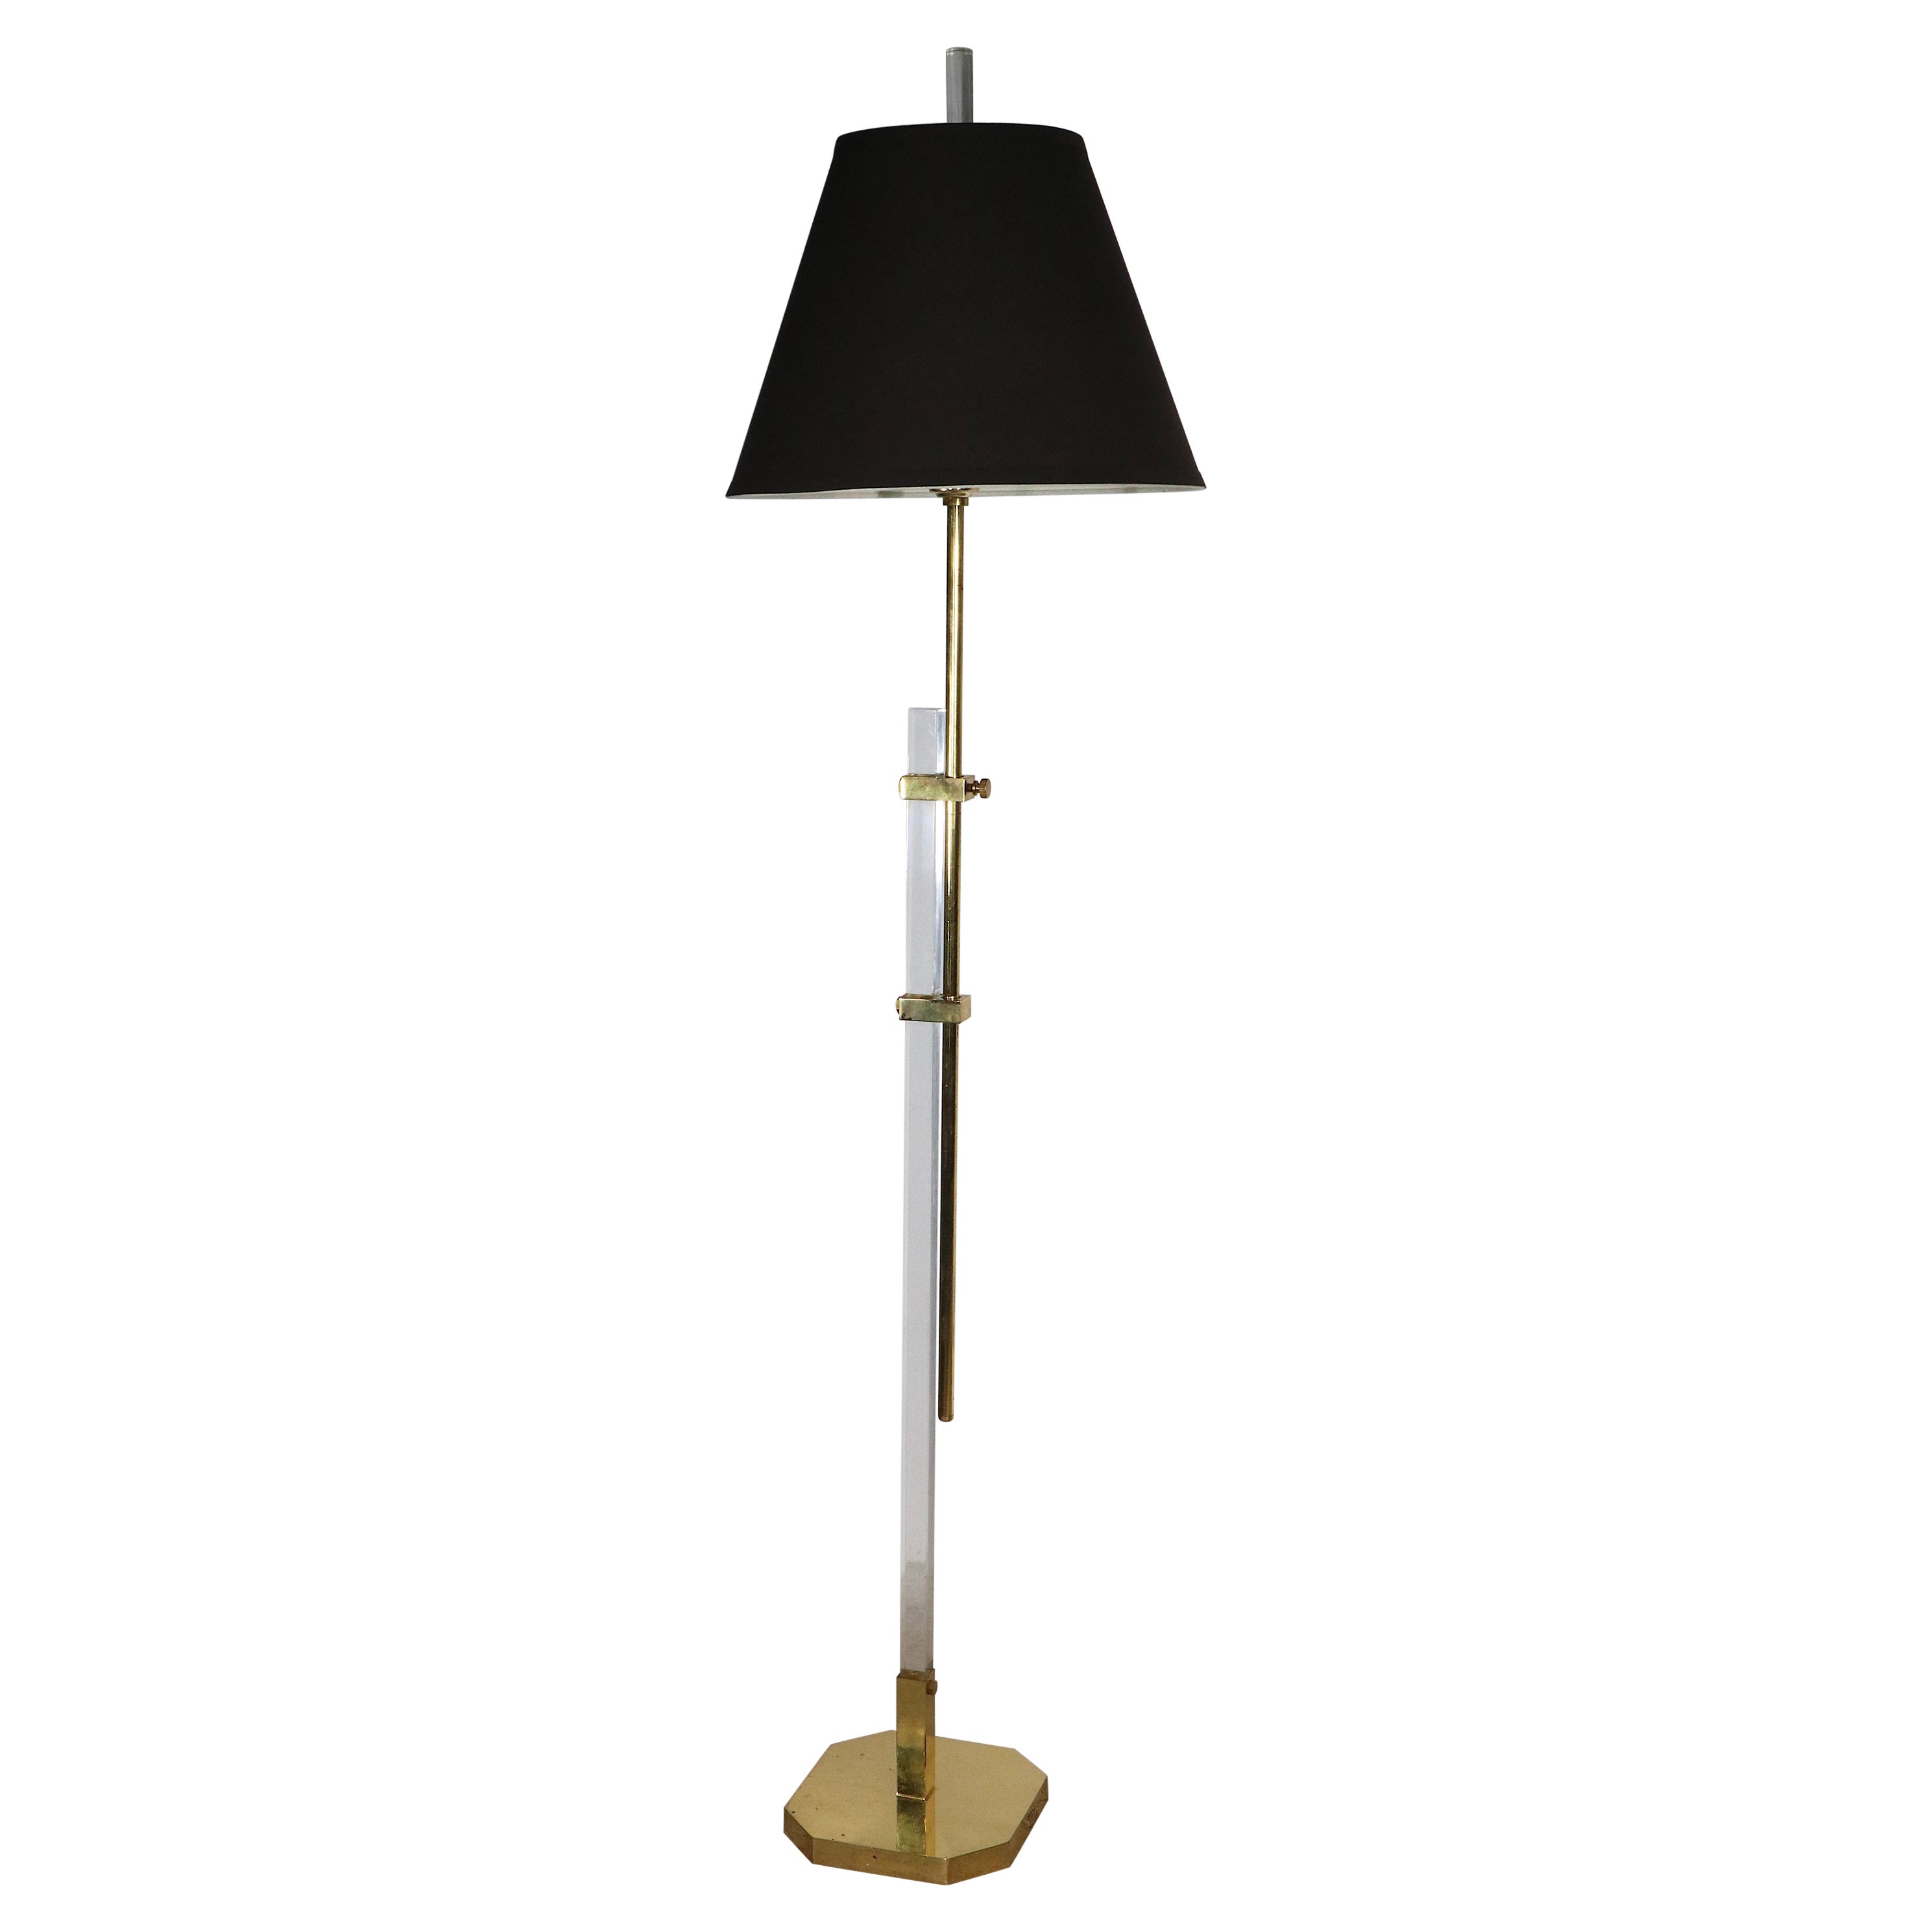  Adjustable Hollywood Regency Style Brass and Lucite Floor Lamp c. 1970/1980's